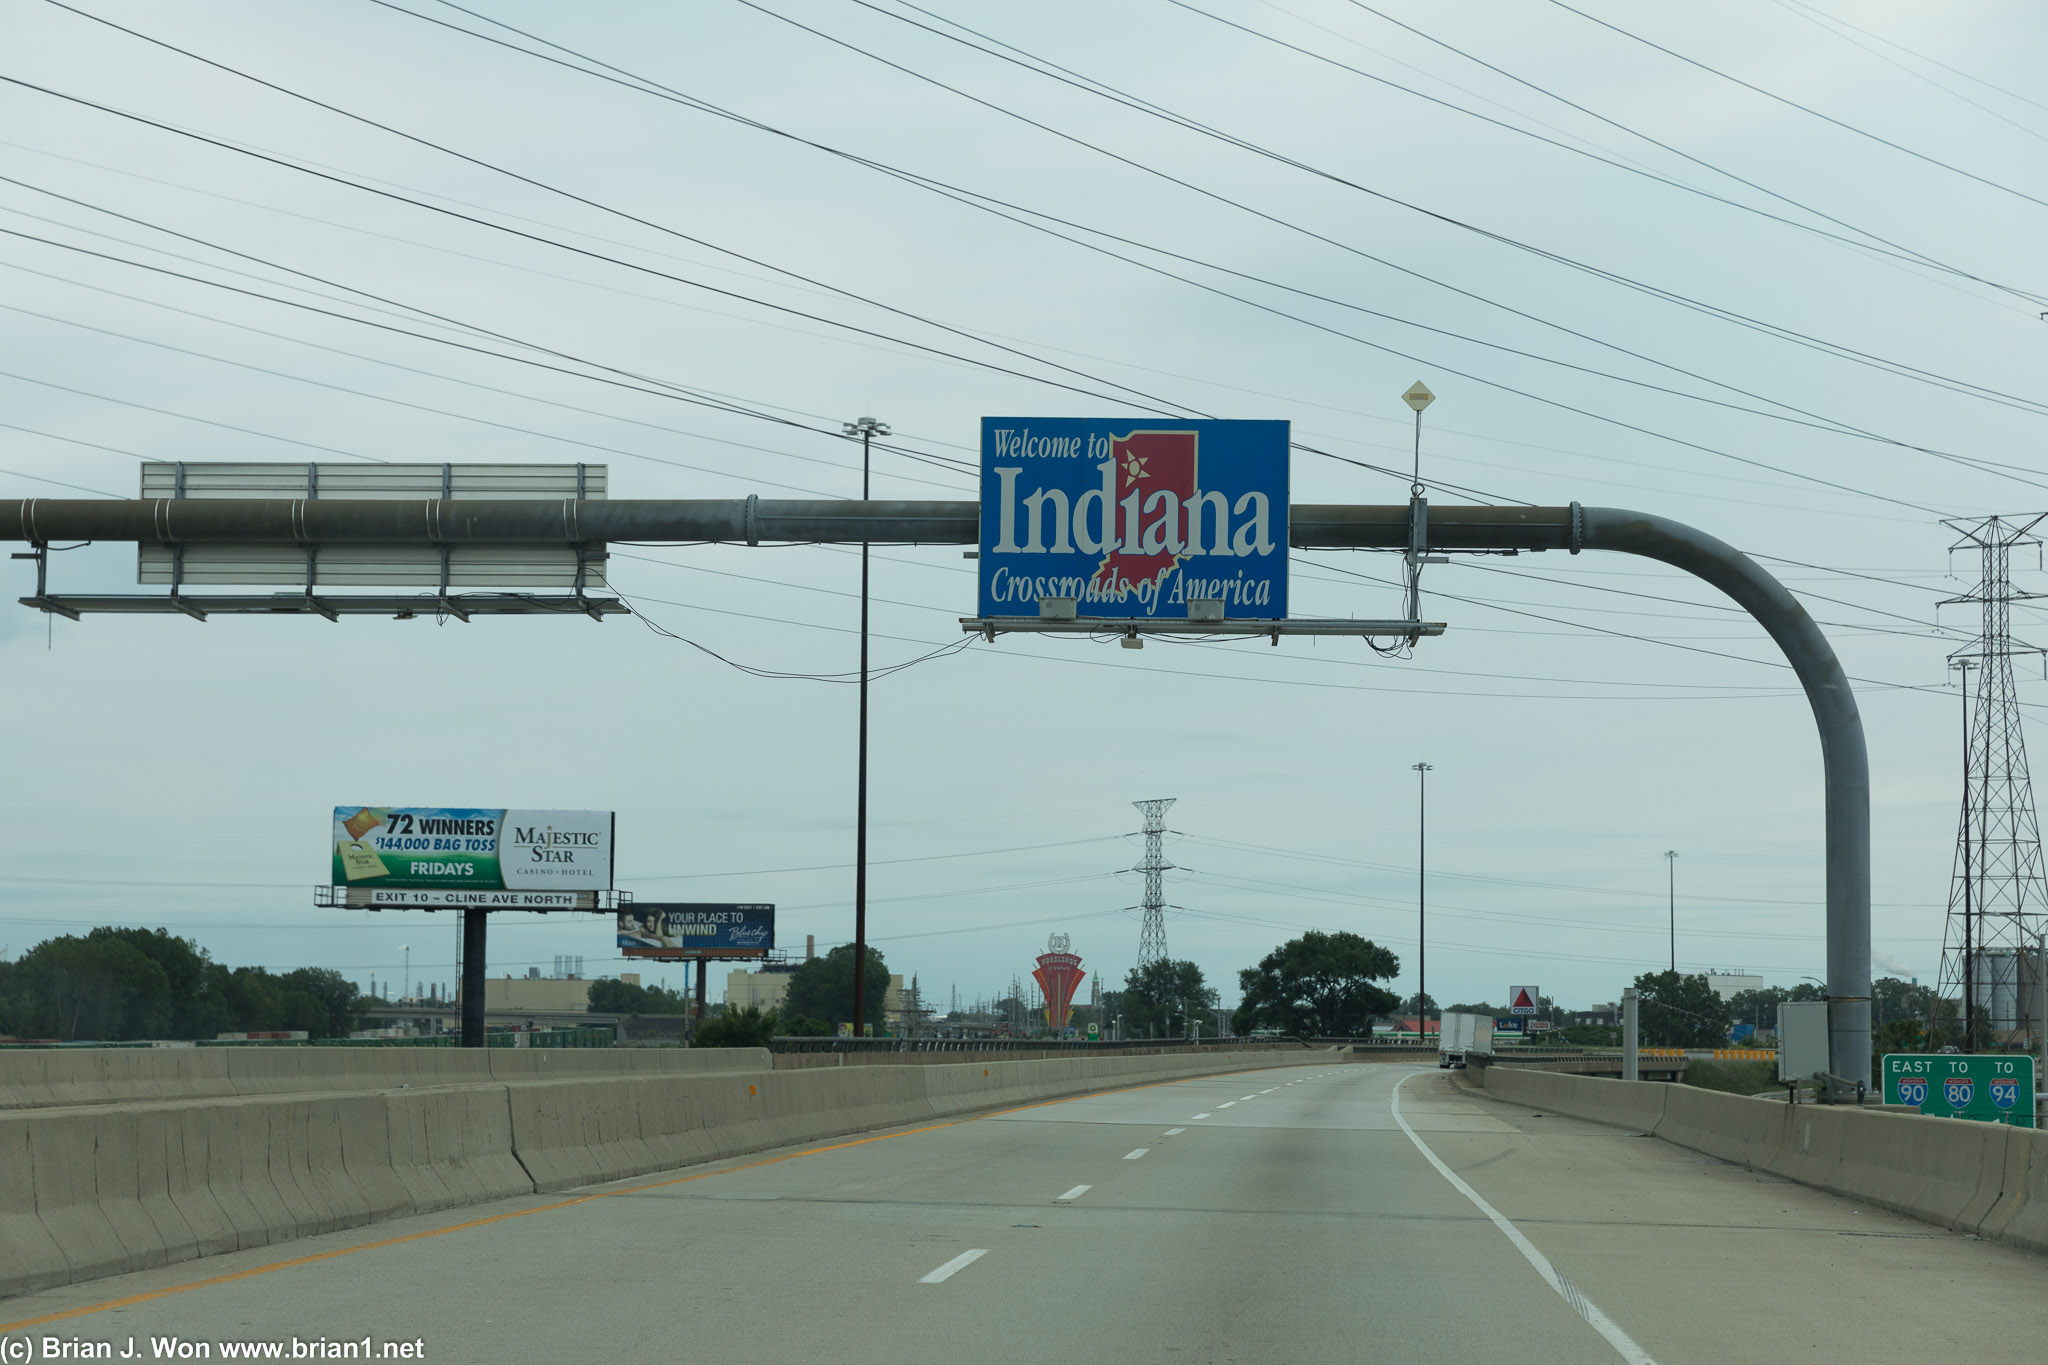 Welcome to Indiana.